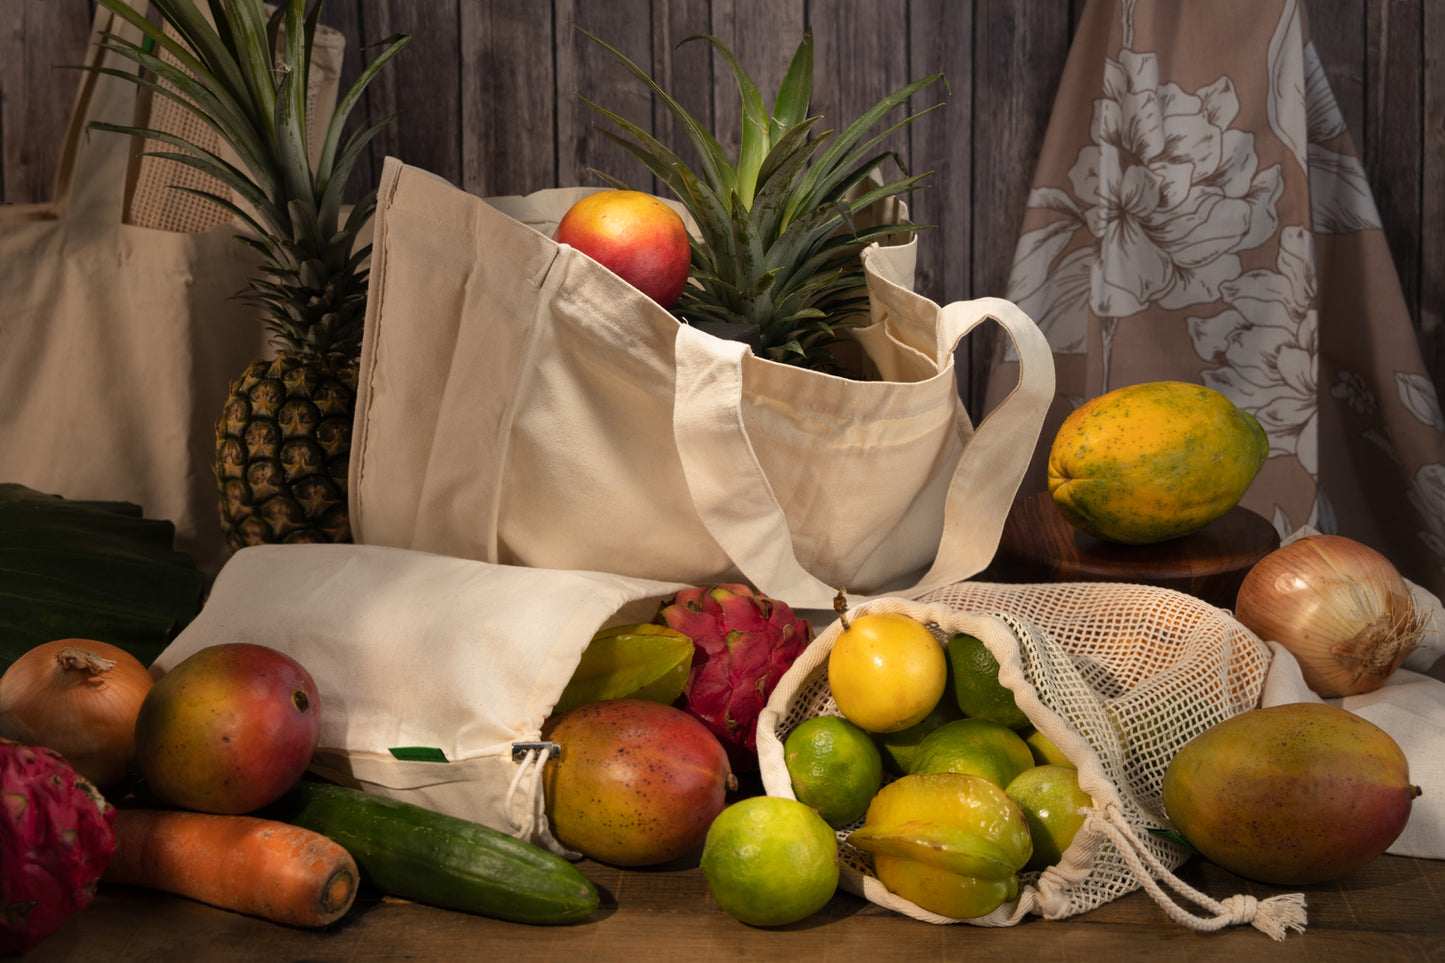 This image shows the Desesh unbranded cotton mesh grocery produce bag with tare weight label for zero waste plastic free grocery shopping as an alternative to plastic bags. In the image the bags are full of fruit and produce